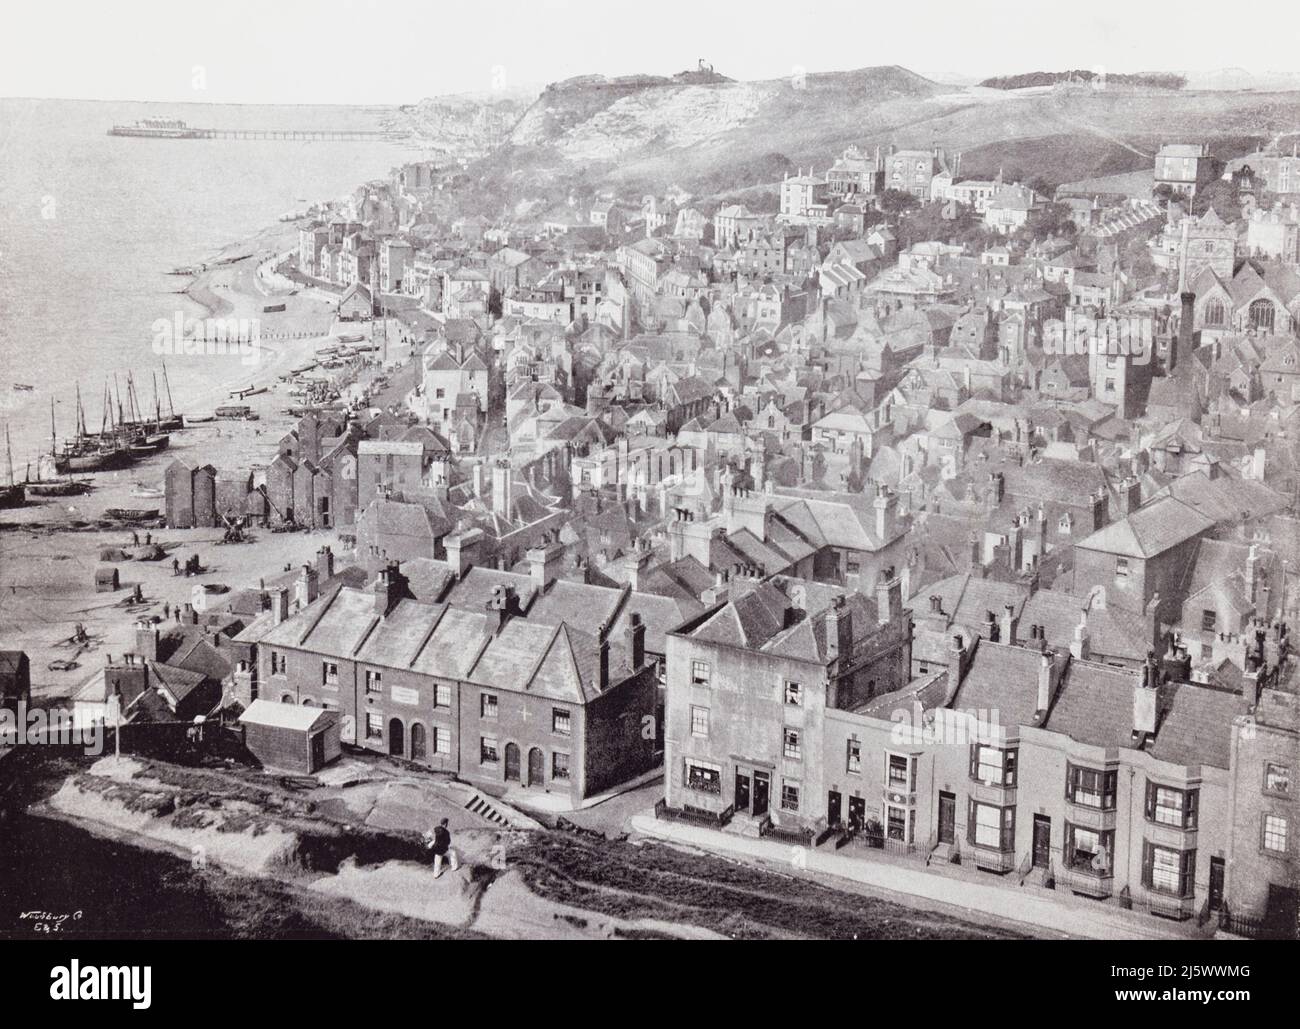 Hastings, East Sussex, England, seen from the East Hill in the 19th century.  From Around The Coast,  An Album of Pictures from Photographs of the Chief Seaside Places of Interest in Great Britain and Ireland published London, 1895, by George Newnes Limited. Stock Photo